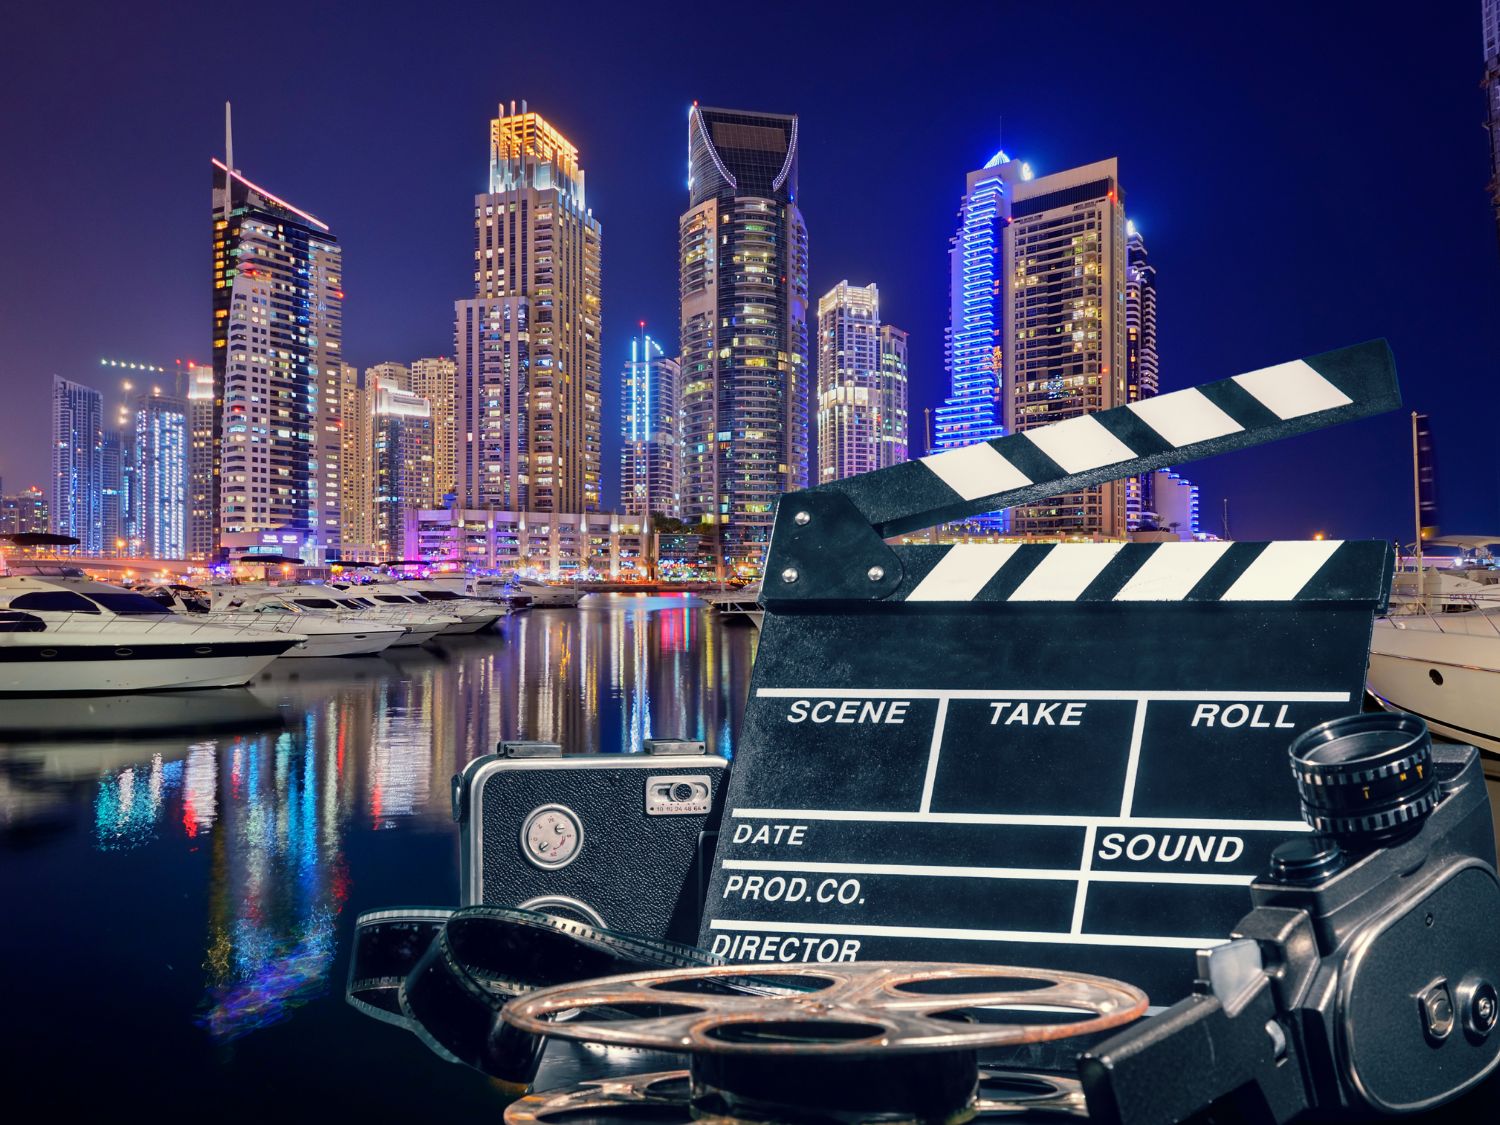 18 Extraordinary Movies Set In Dubai That Will Inspire You To Visit!